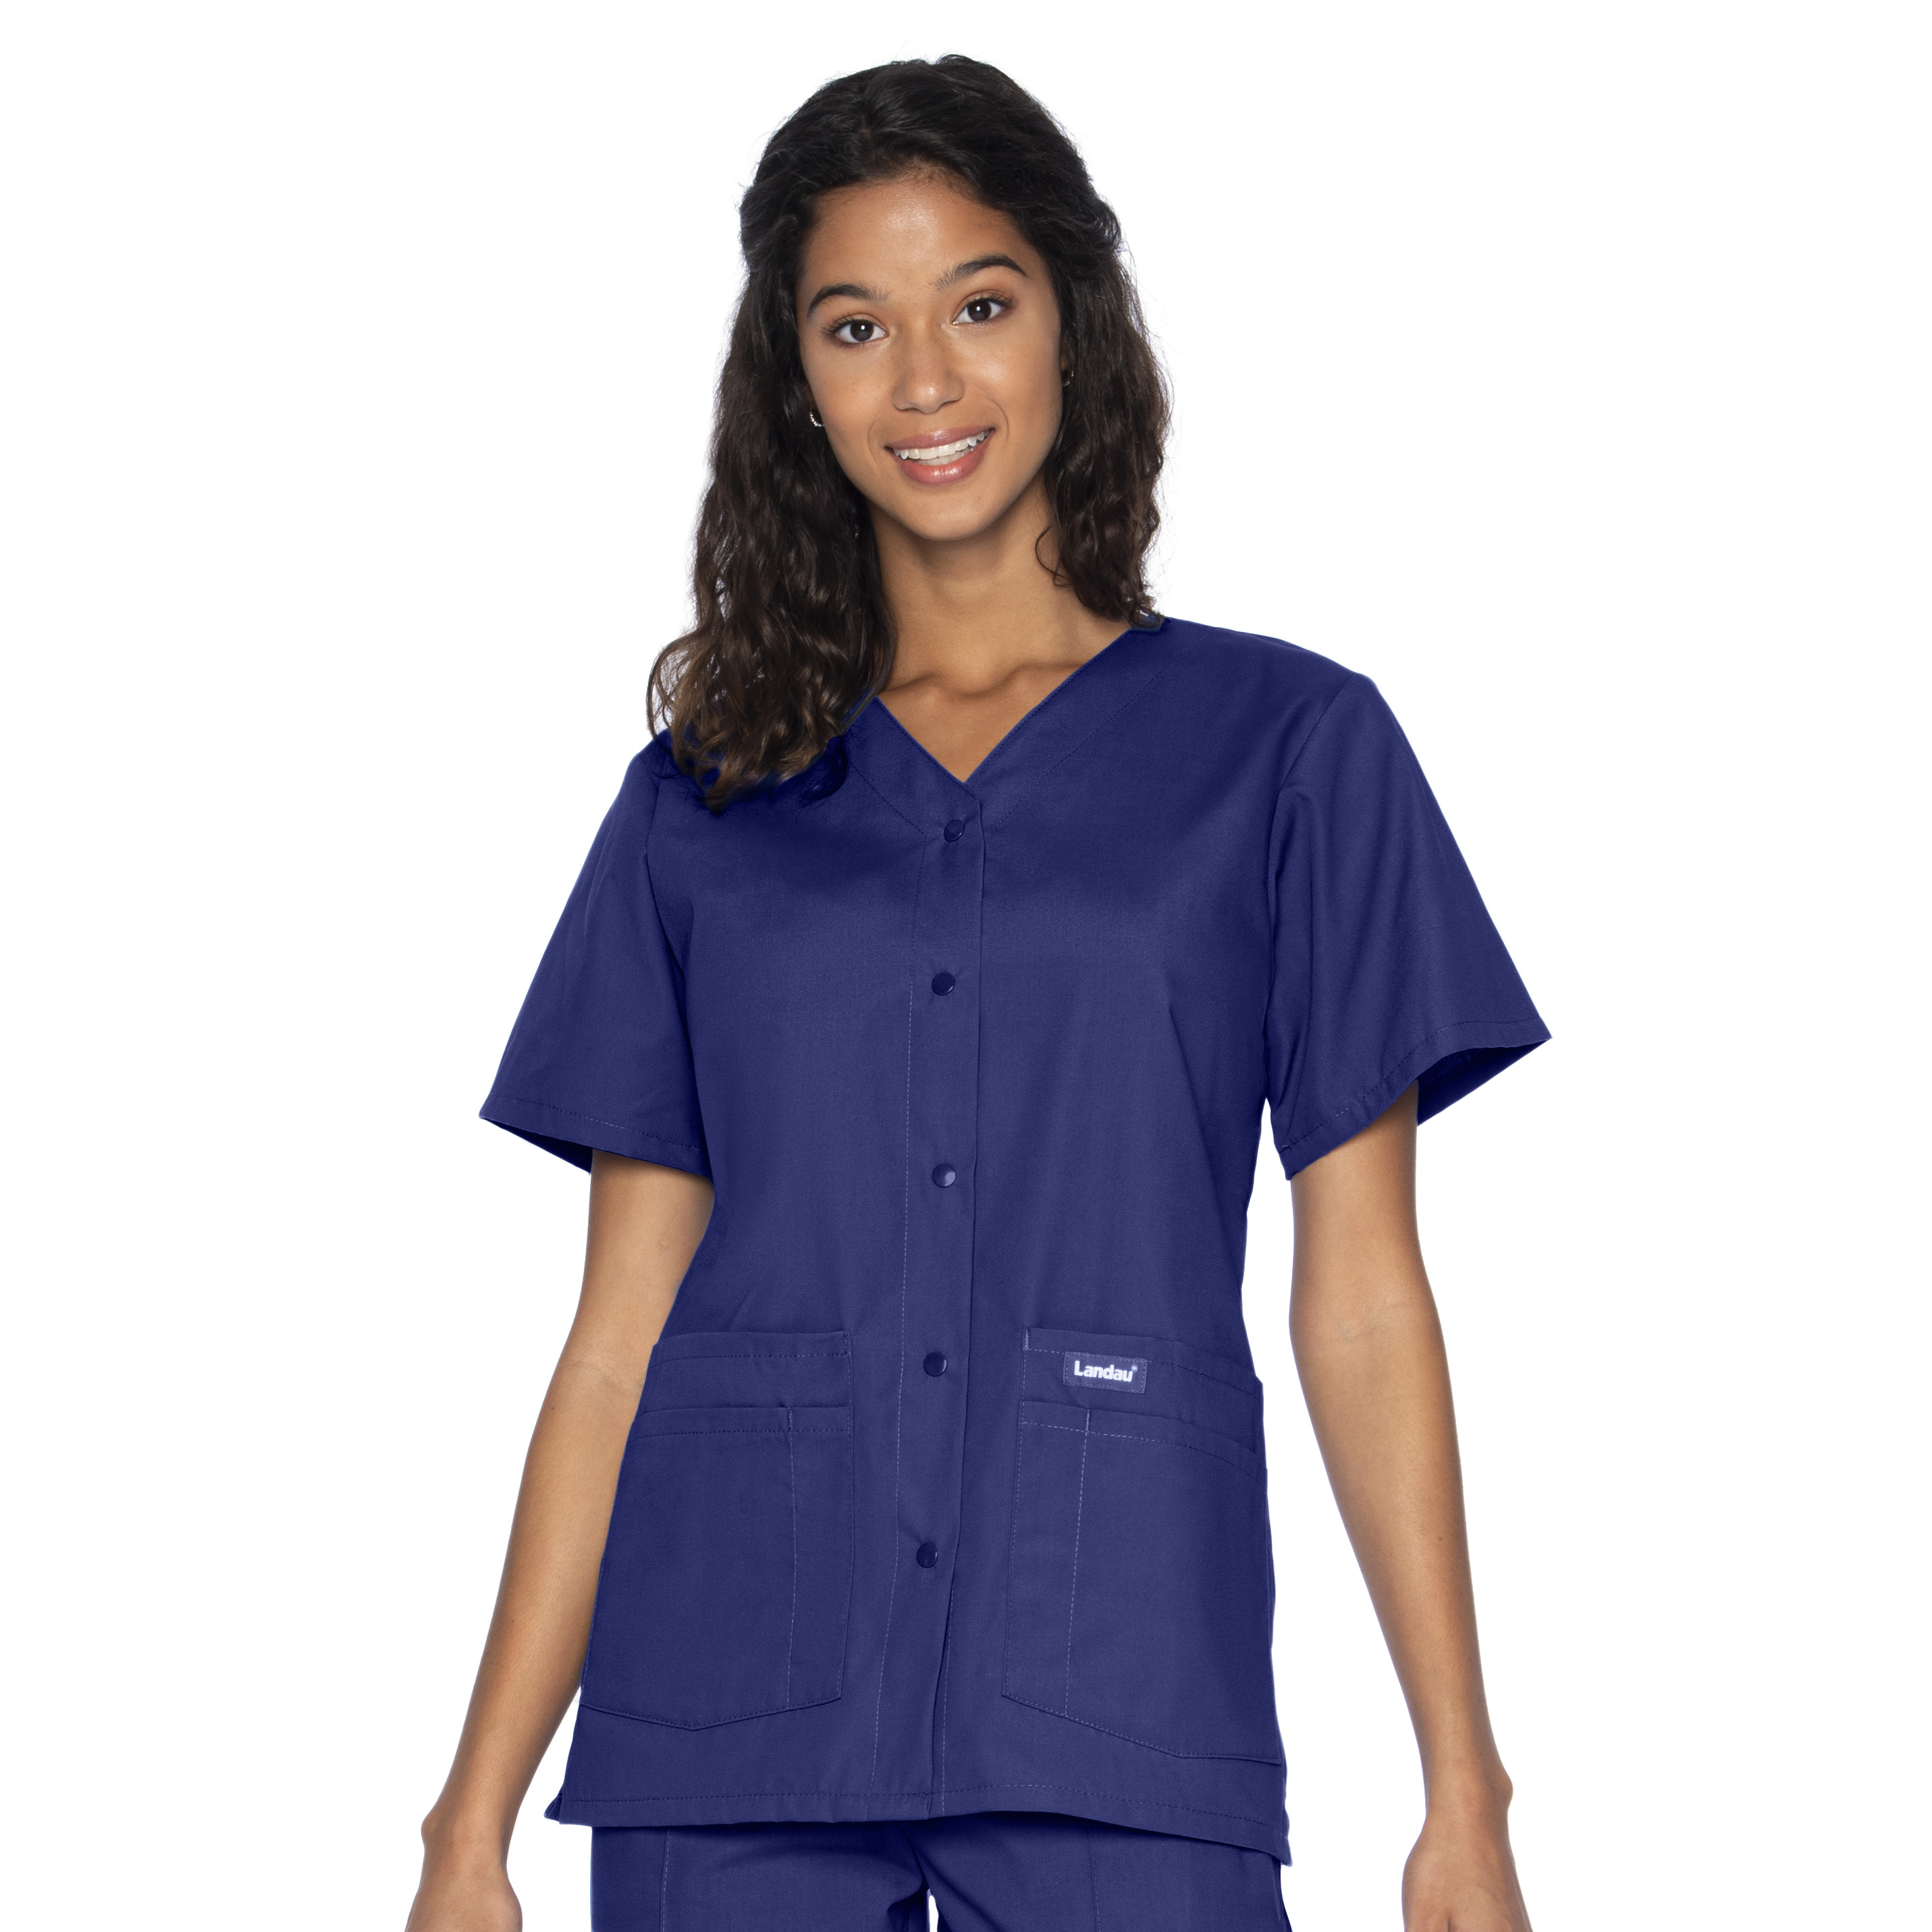 Landau Essentials Snap Front Scrub Top for Women: Classic Relaxed Fit, V-Neck, 4 Pockets 8232 Questions & Answers